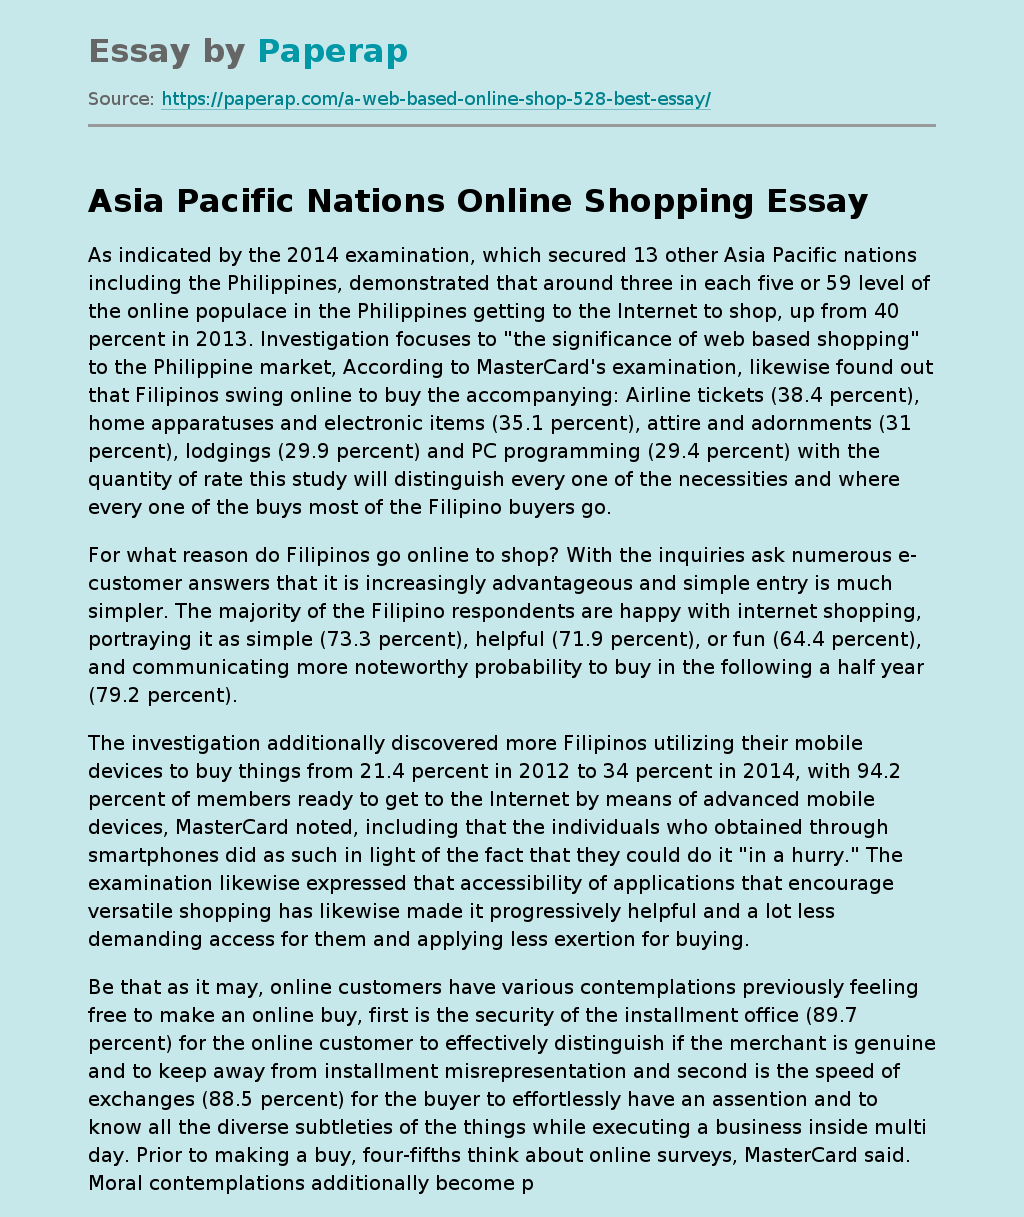 Asia Pacific Nations Online Shopping